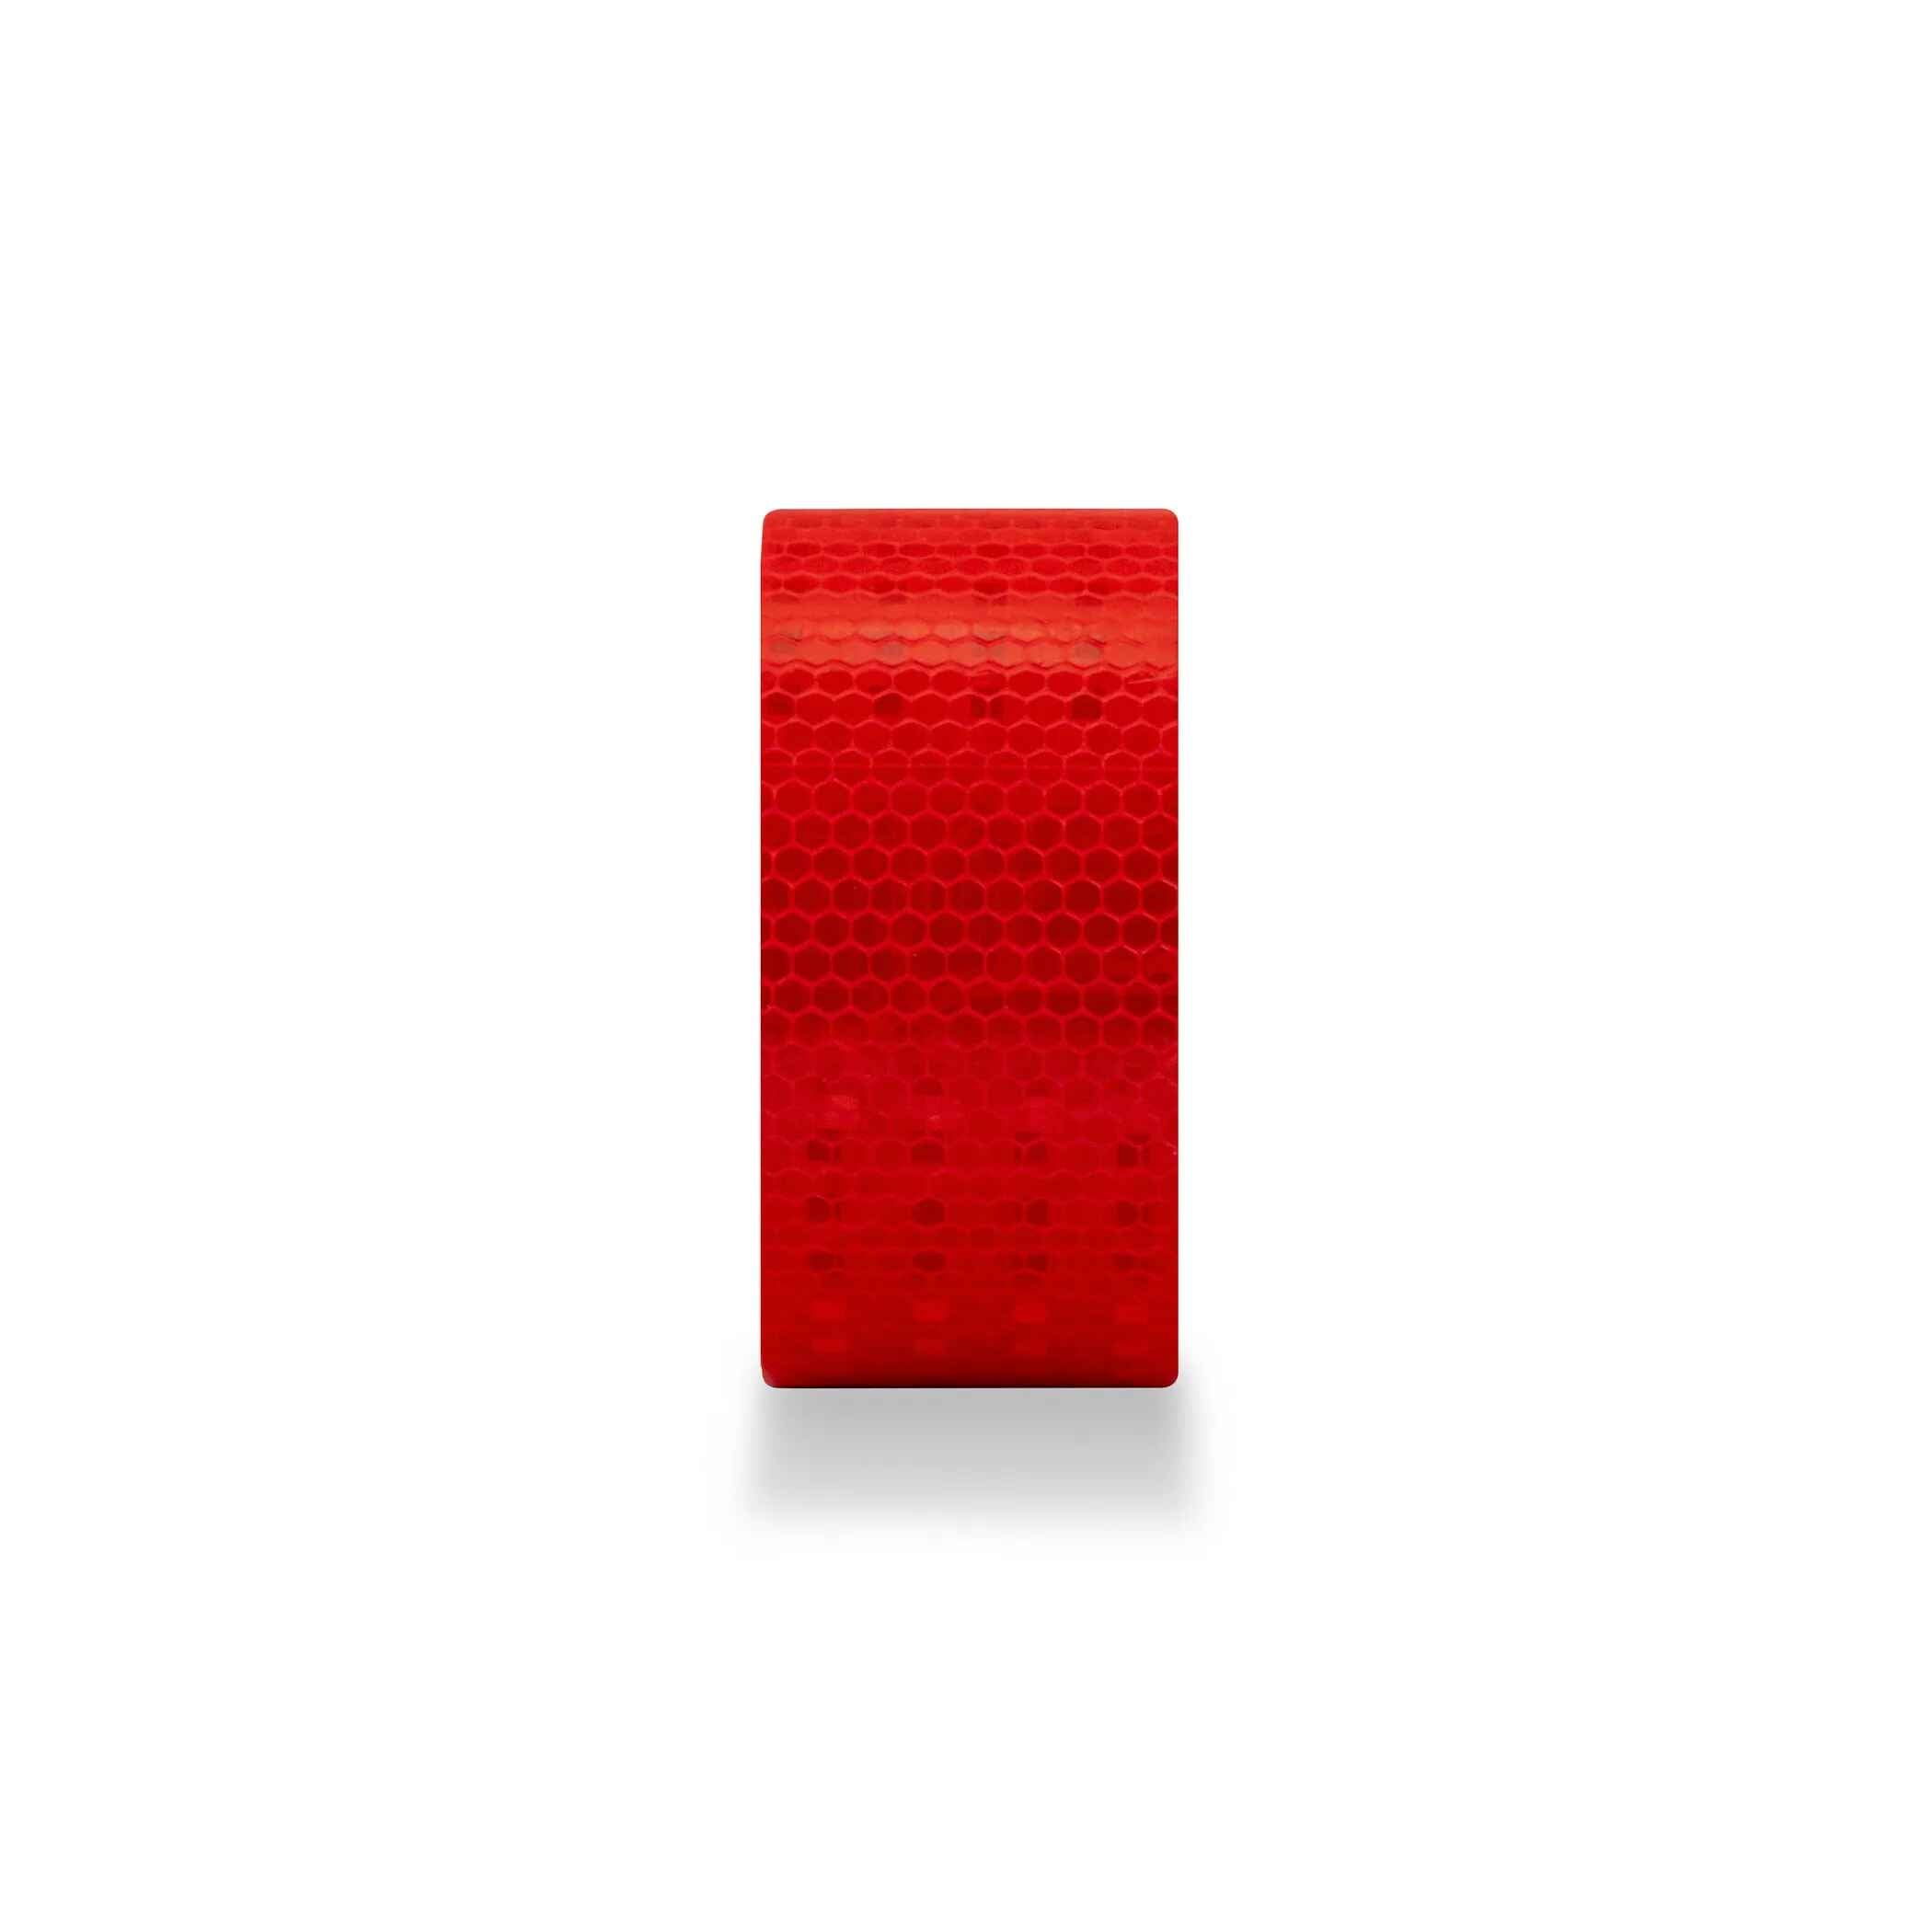 Brightplus DOT-C2 Conspicuity Safety Dot Reflective Tape 11 Red 7 White for Trailer Vehicle